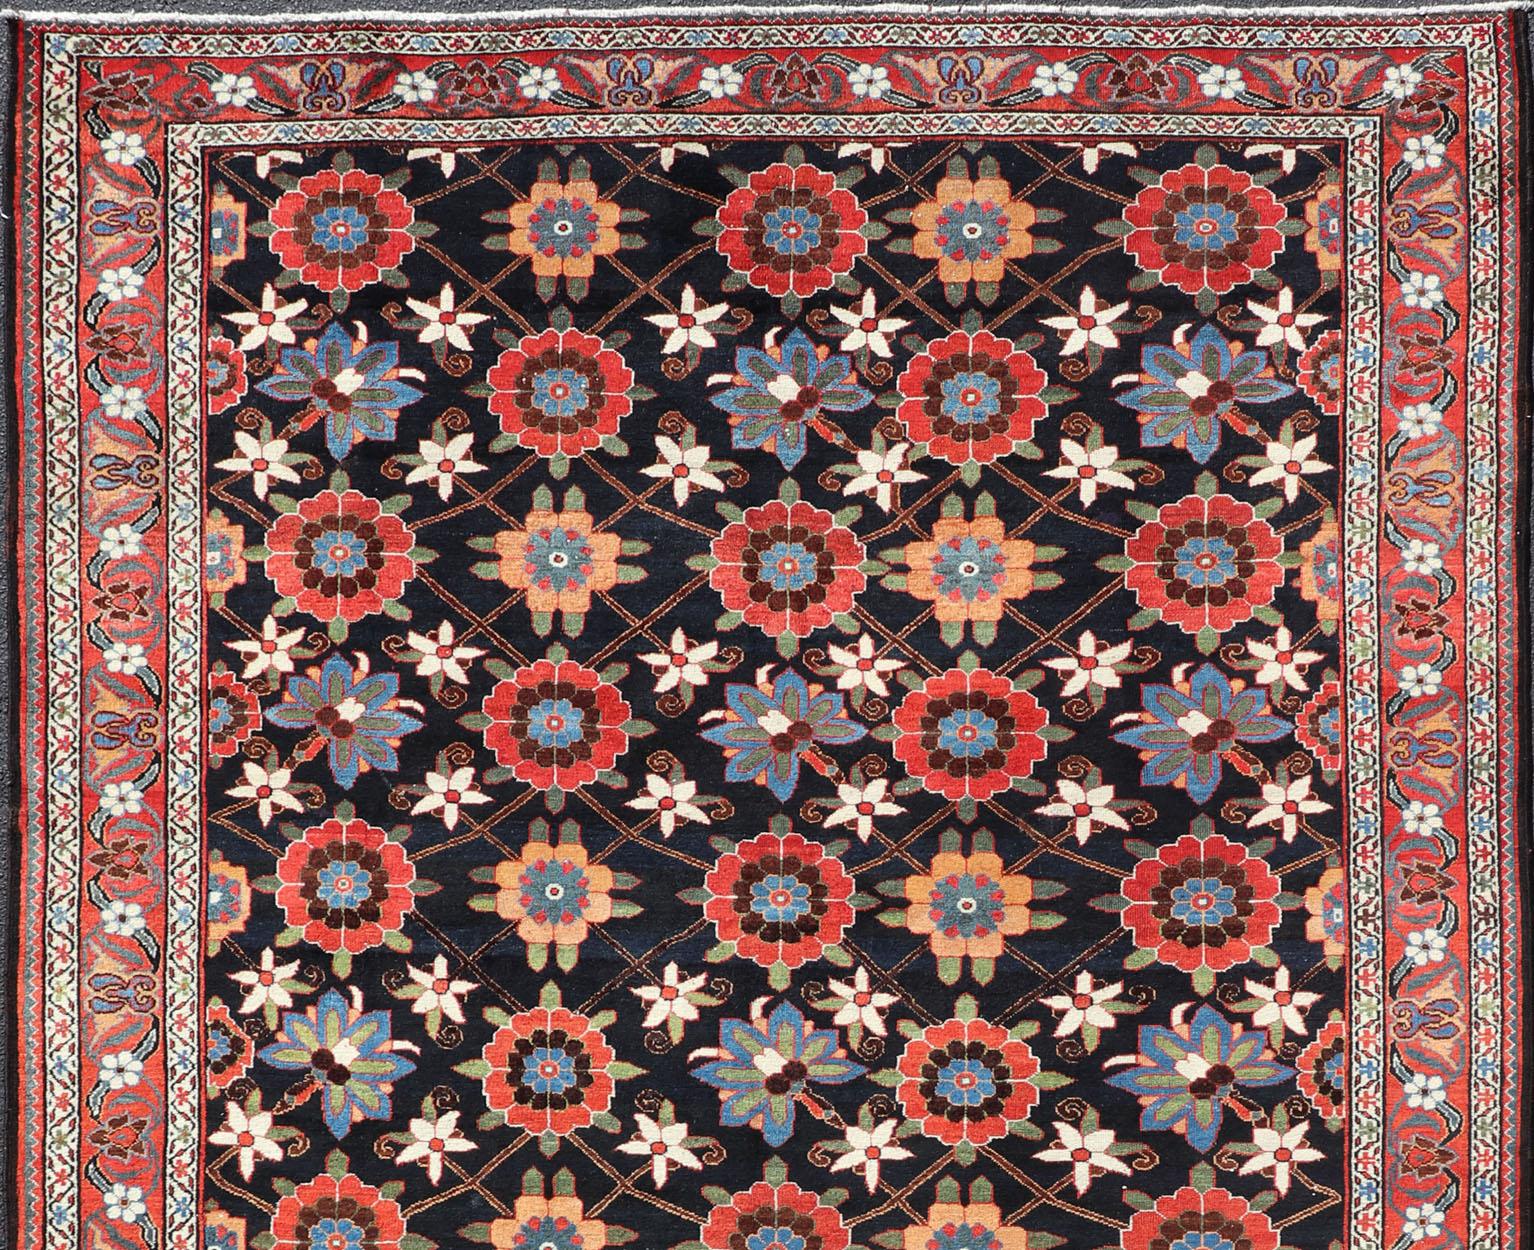 Wool Handknotted Antique Persian Gallery Bakhitari Rug in All-Over Floral Design In Good Condition For Sale In Atlanta, GA